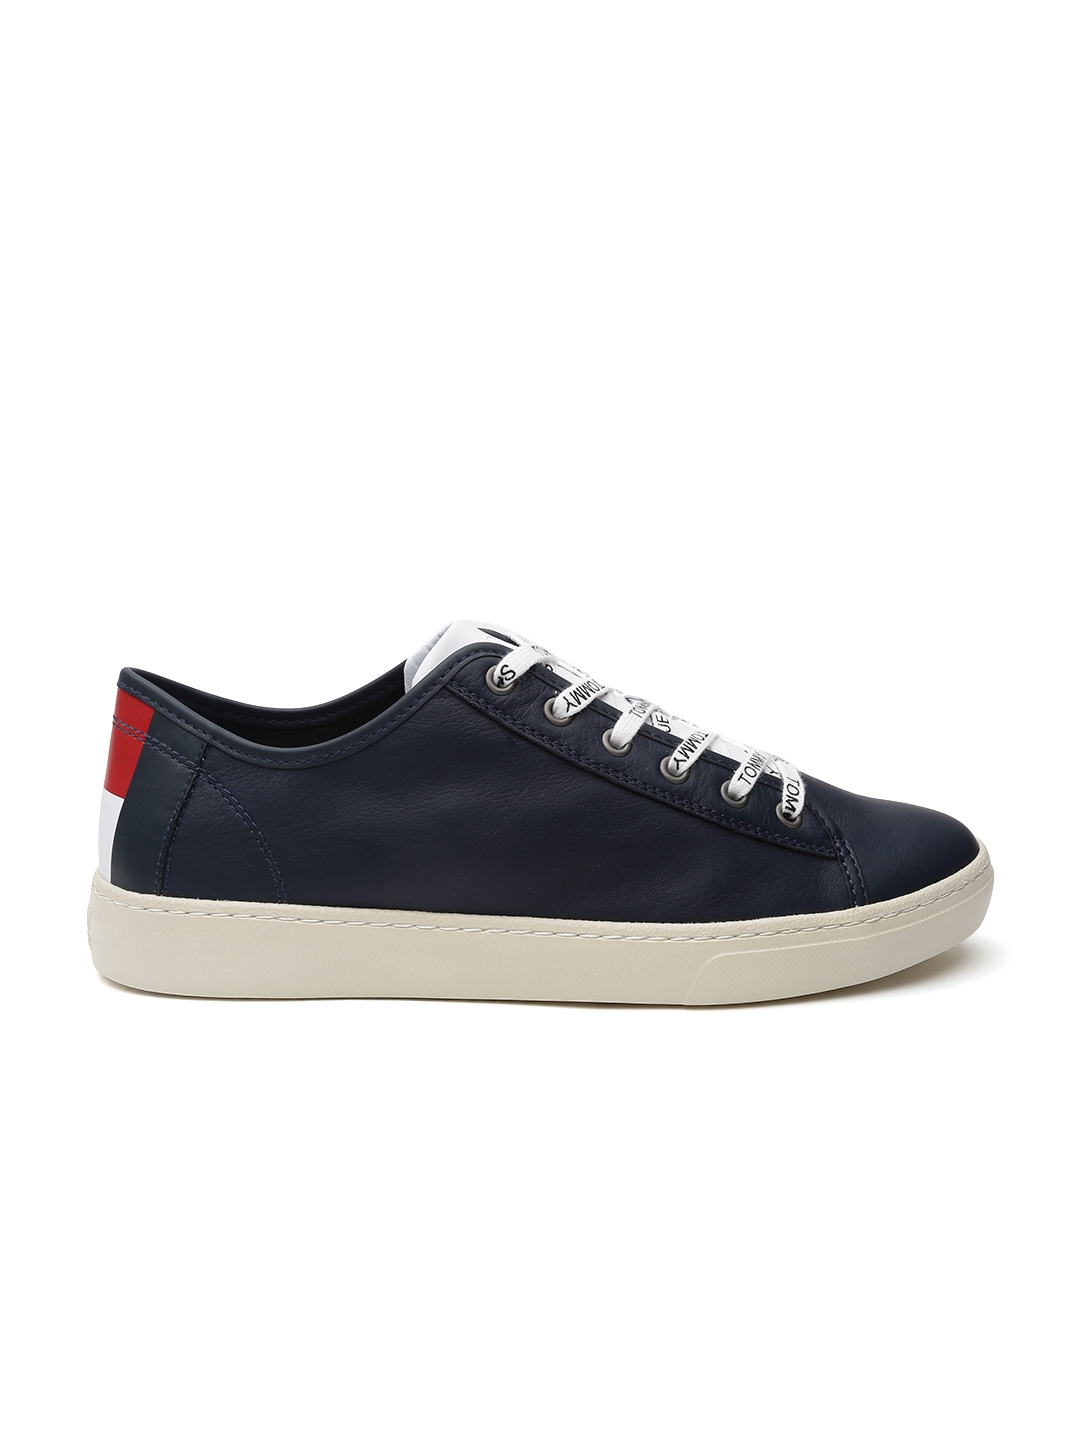 Buy Tommy Hilfiger Men Navy Blue Sneakers - Casual Shoes for Men ...